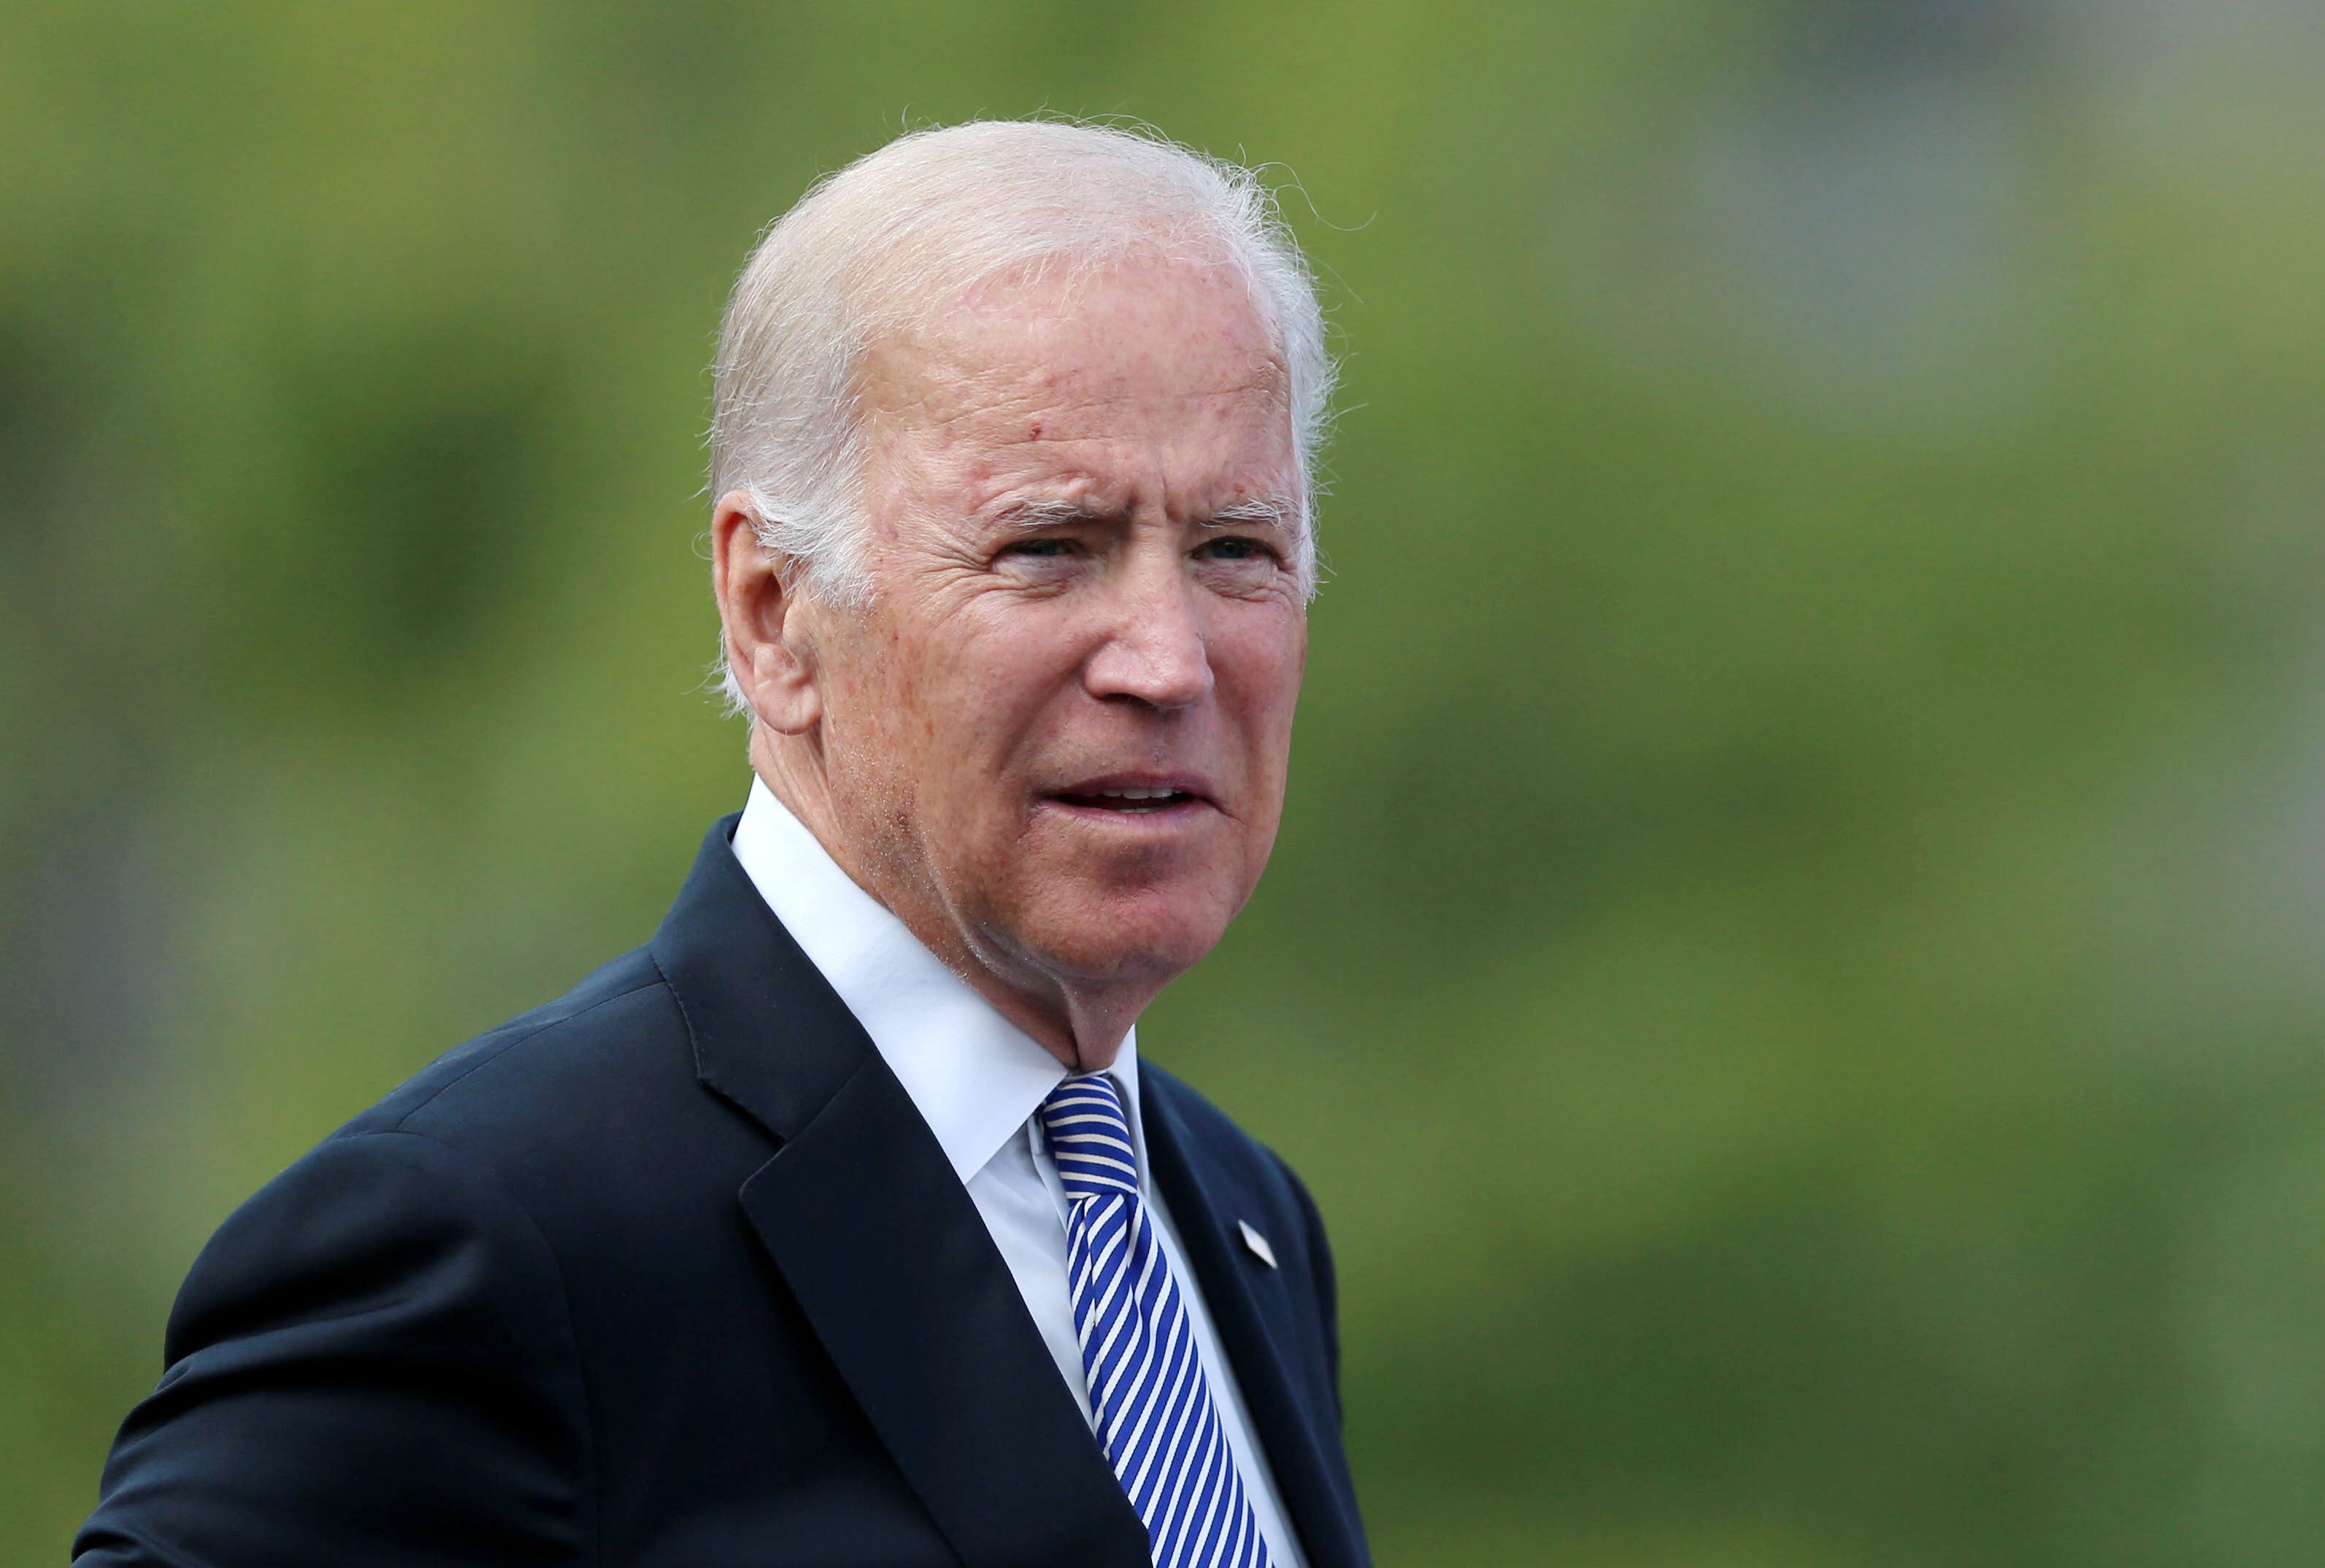 Many believe Biden will win Texas in a historic defeat